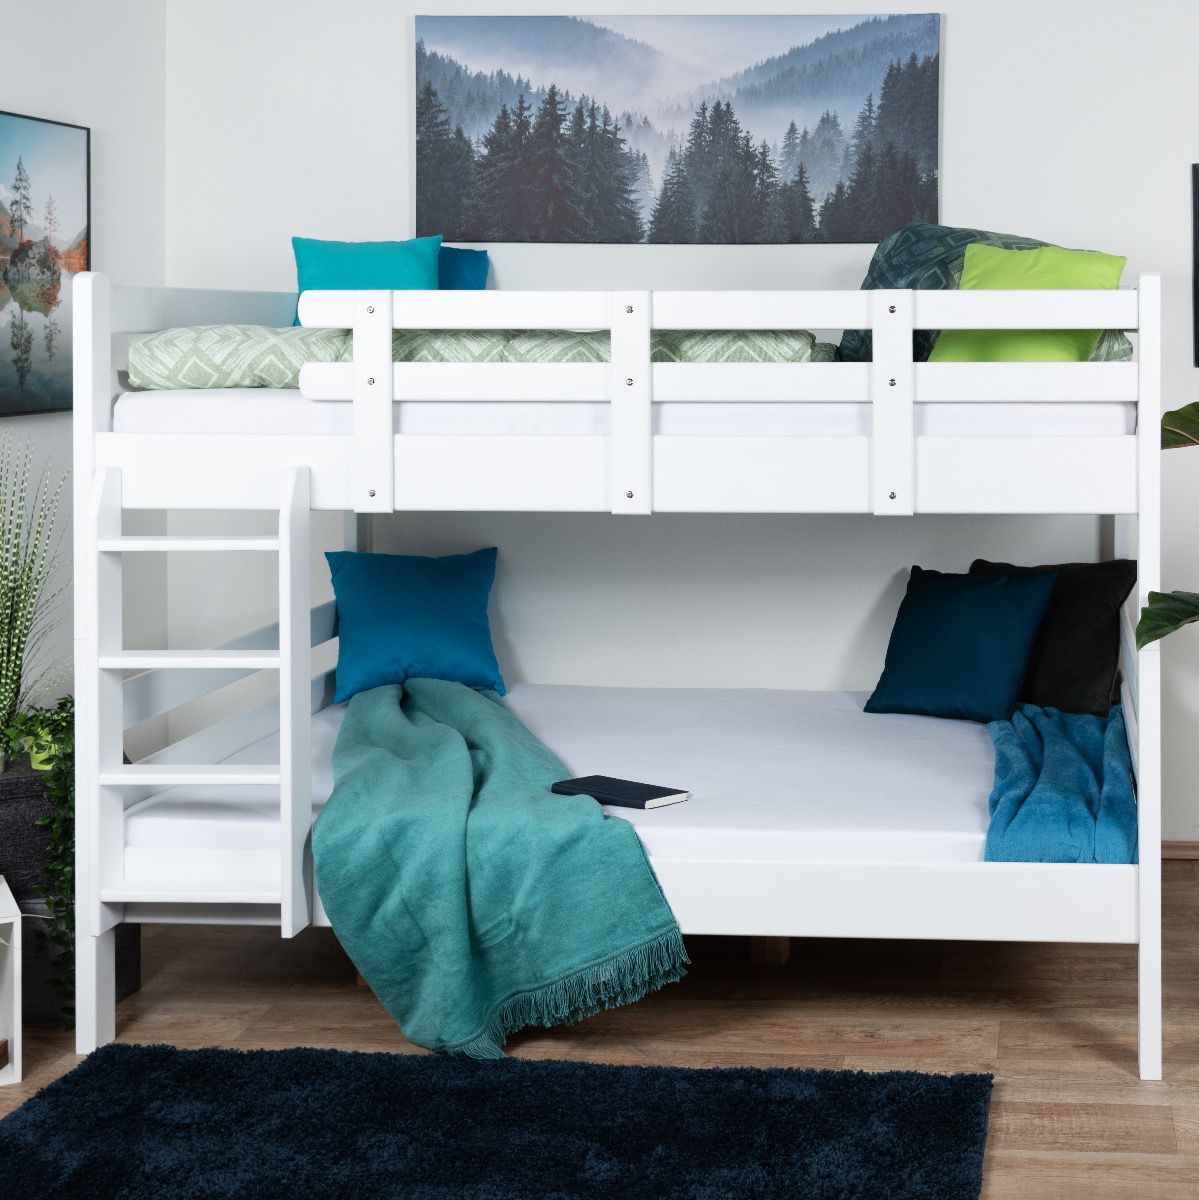 Bunk bed 140 x 190 cm "Easy Premium Line" K24/n, head and foot part straight, solid beech wood, White lacquered, convertible